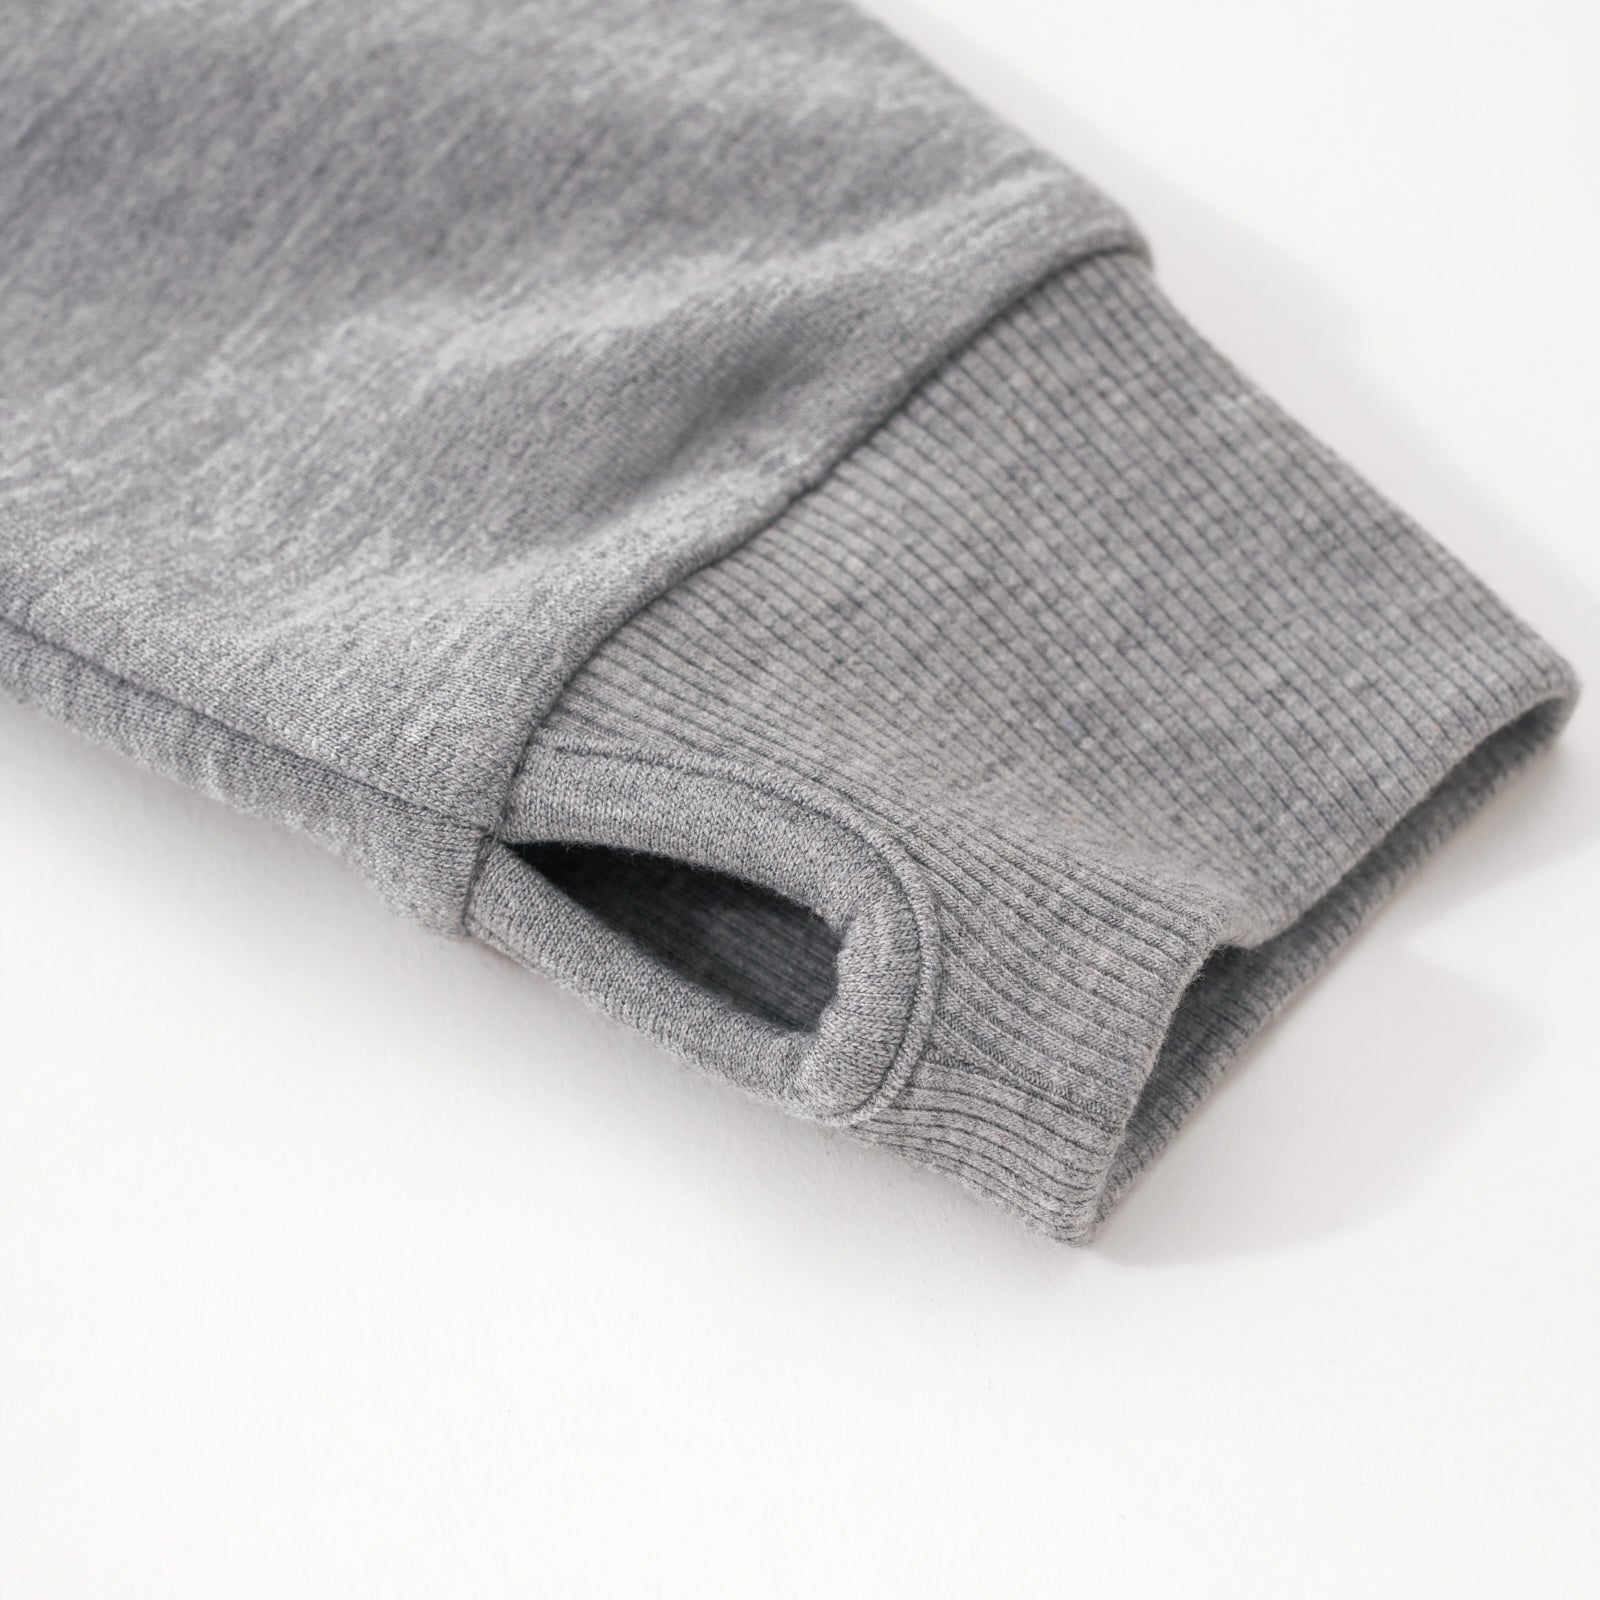 Close up image of the cuff detail on the Heather Gray Zip Hoodie